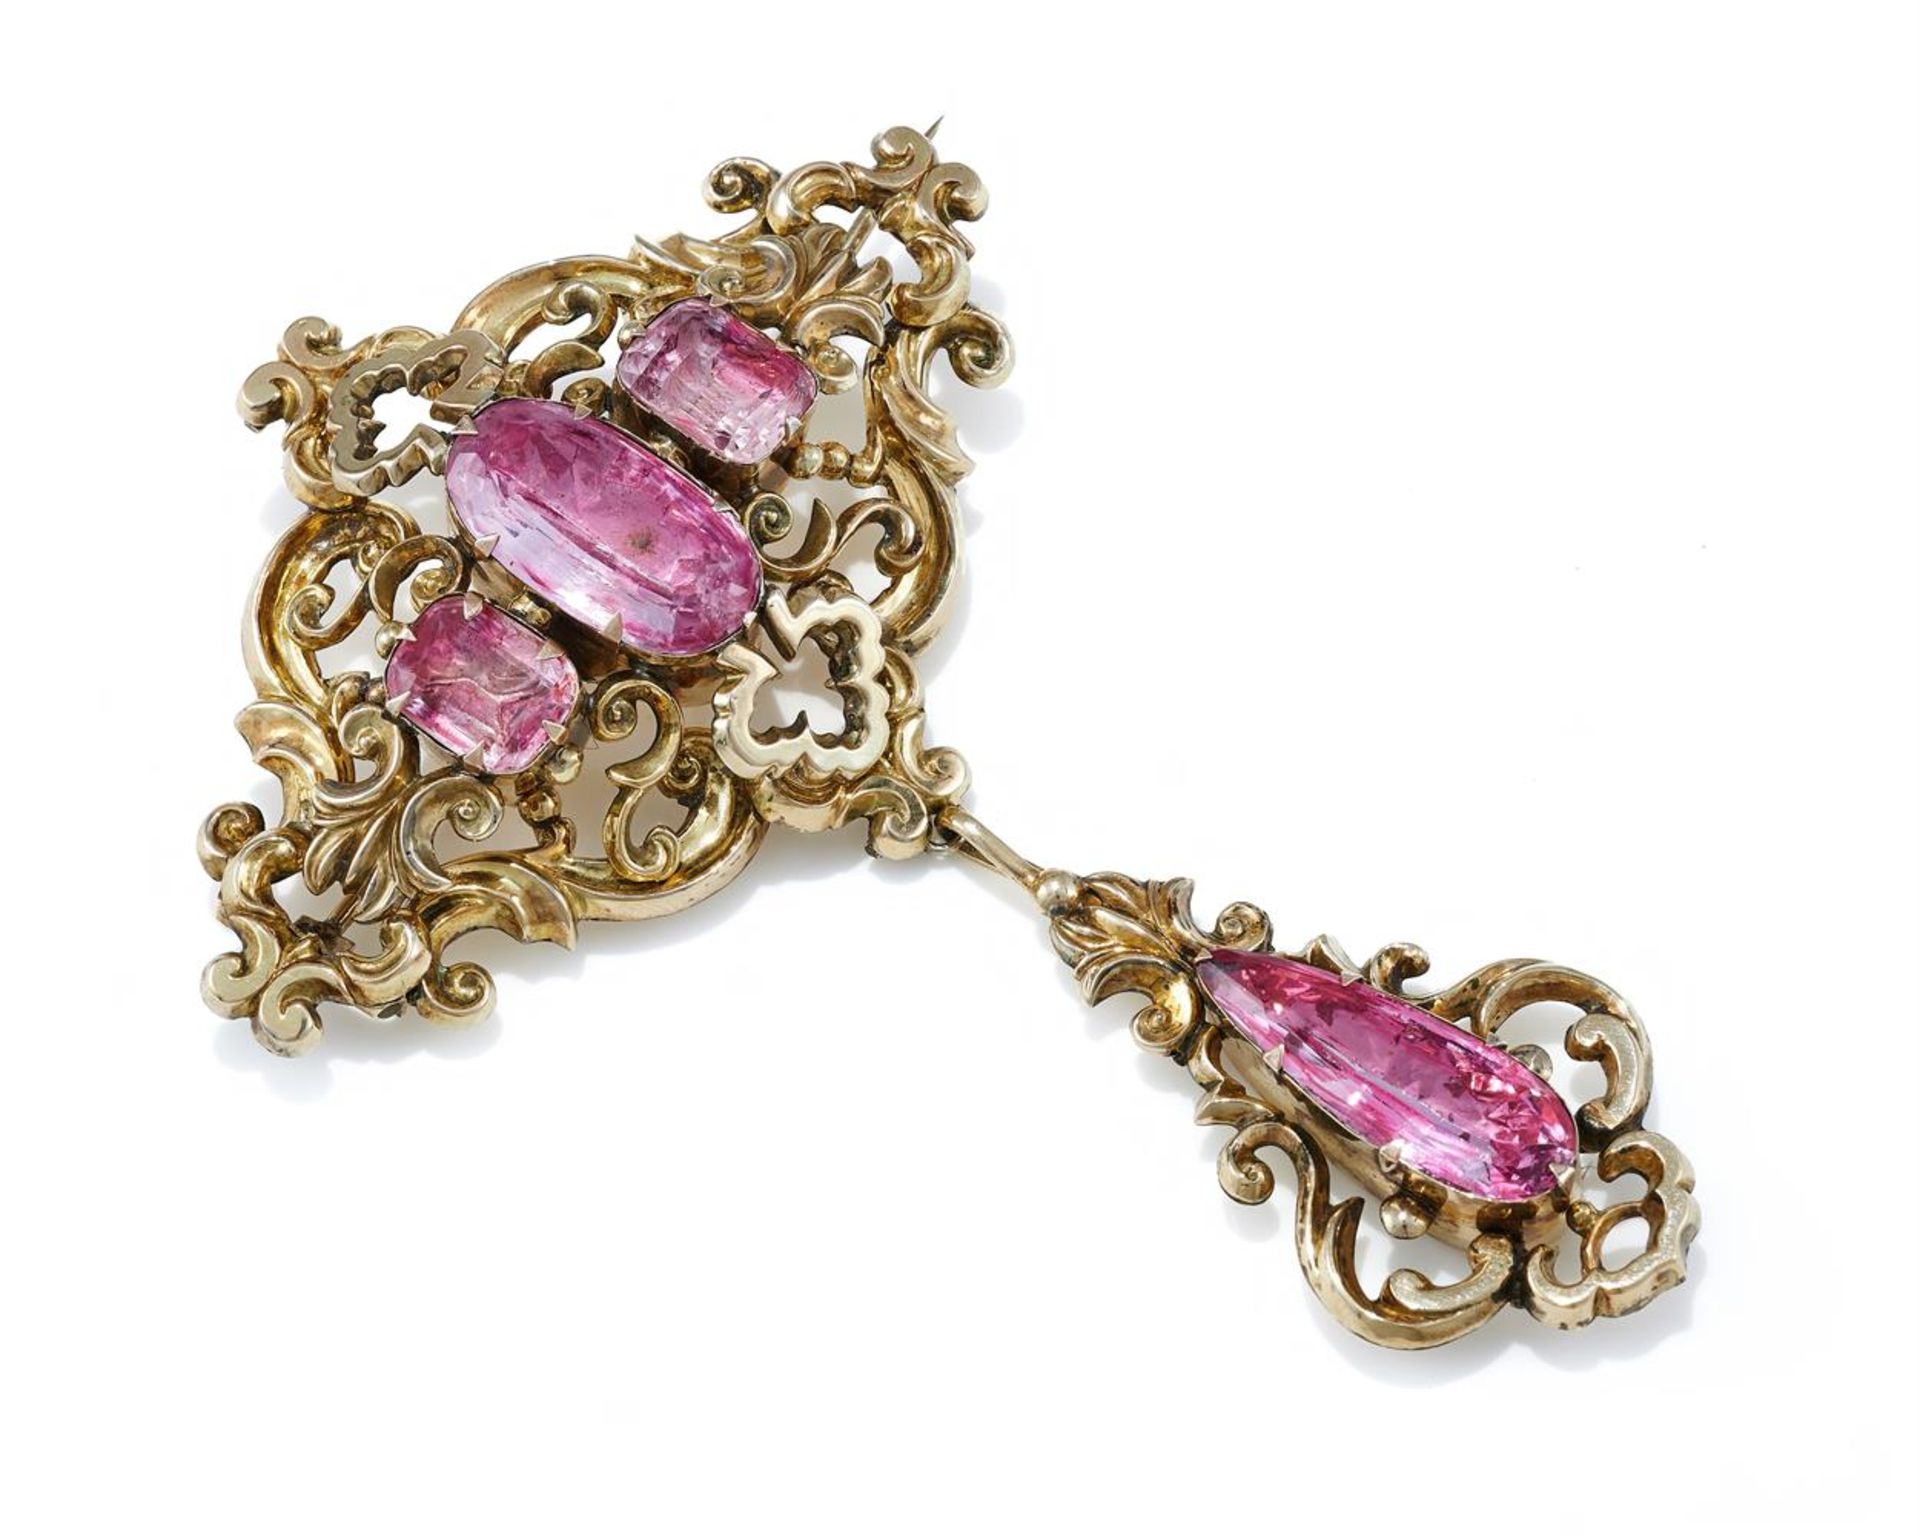 A MID 19TH CENTURY PINK TOPAZ BROOCH, CIRCA 1840 - Image 2 of 3